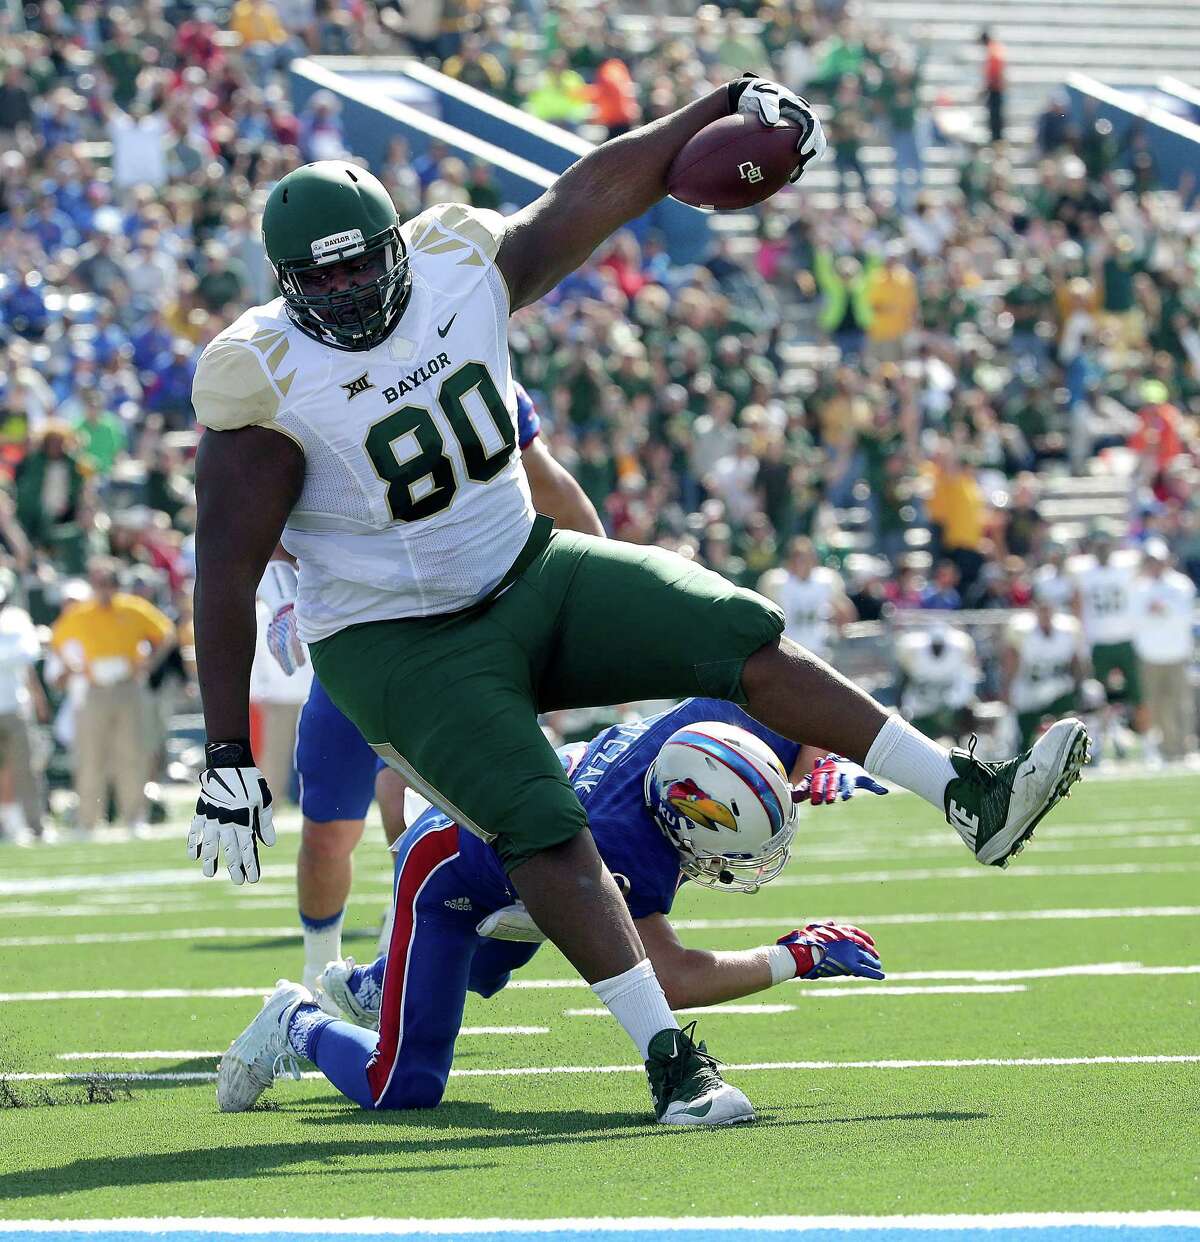 Baylor's 410-pound LaQuan McGowan gets in on the fun by rambling past Kansas' 173-pound Michael Glatczak on a touchdown reception in the first half.